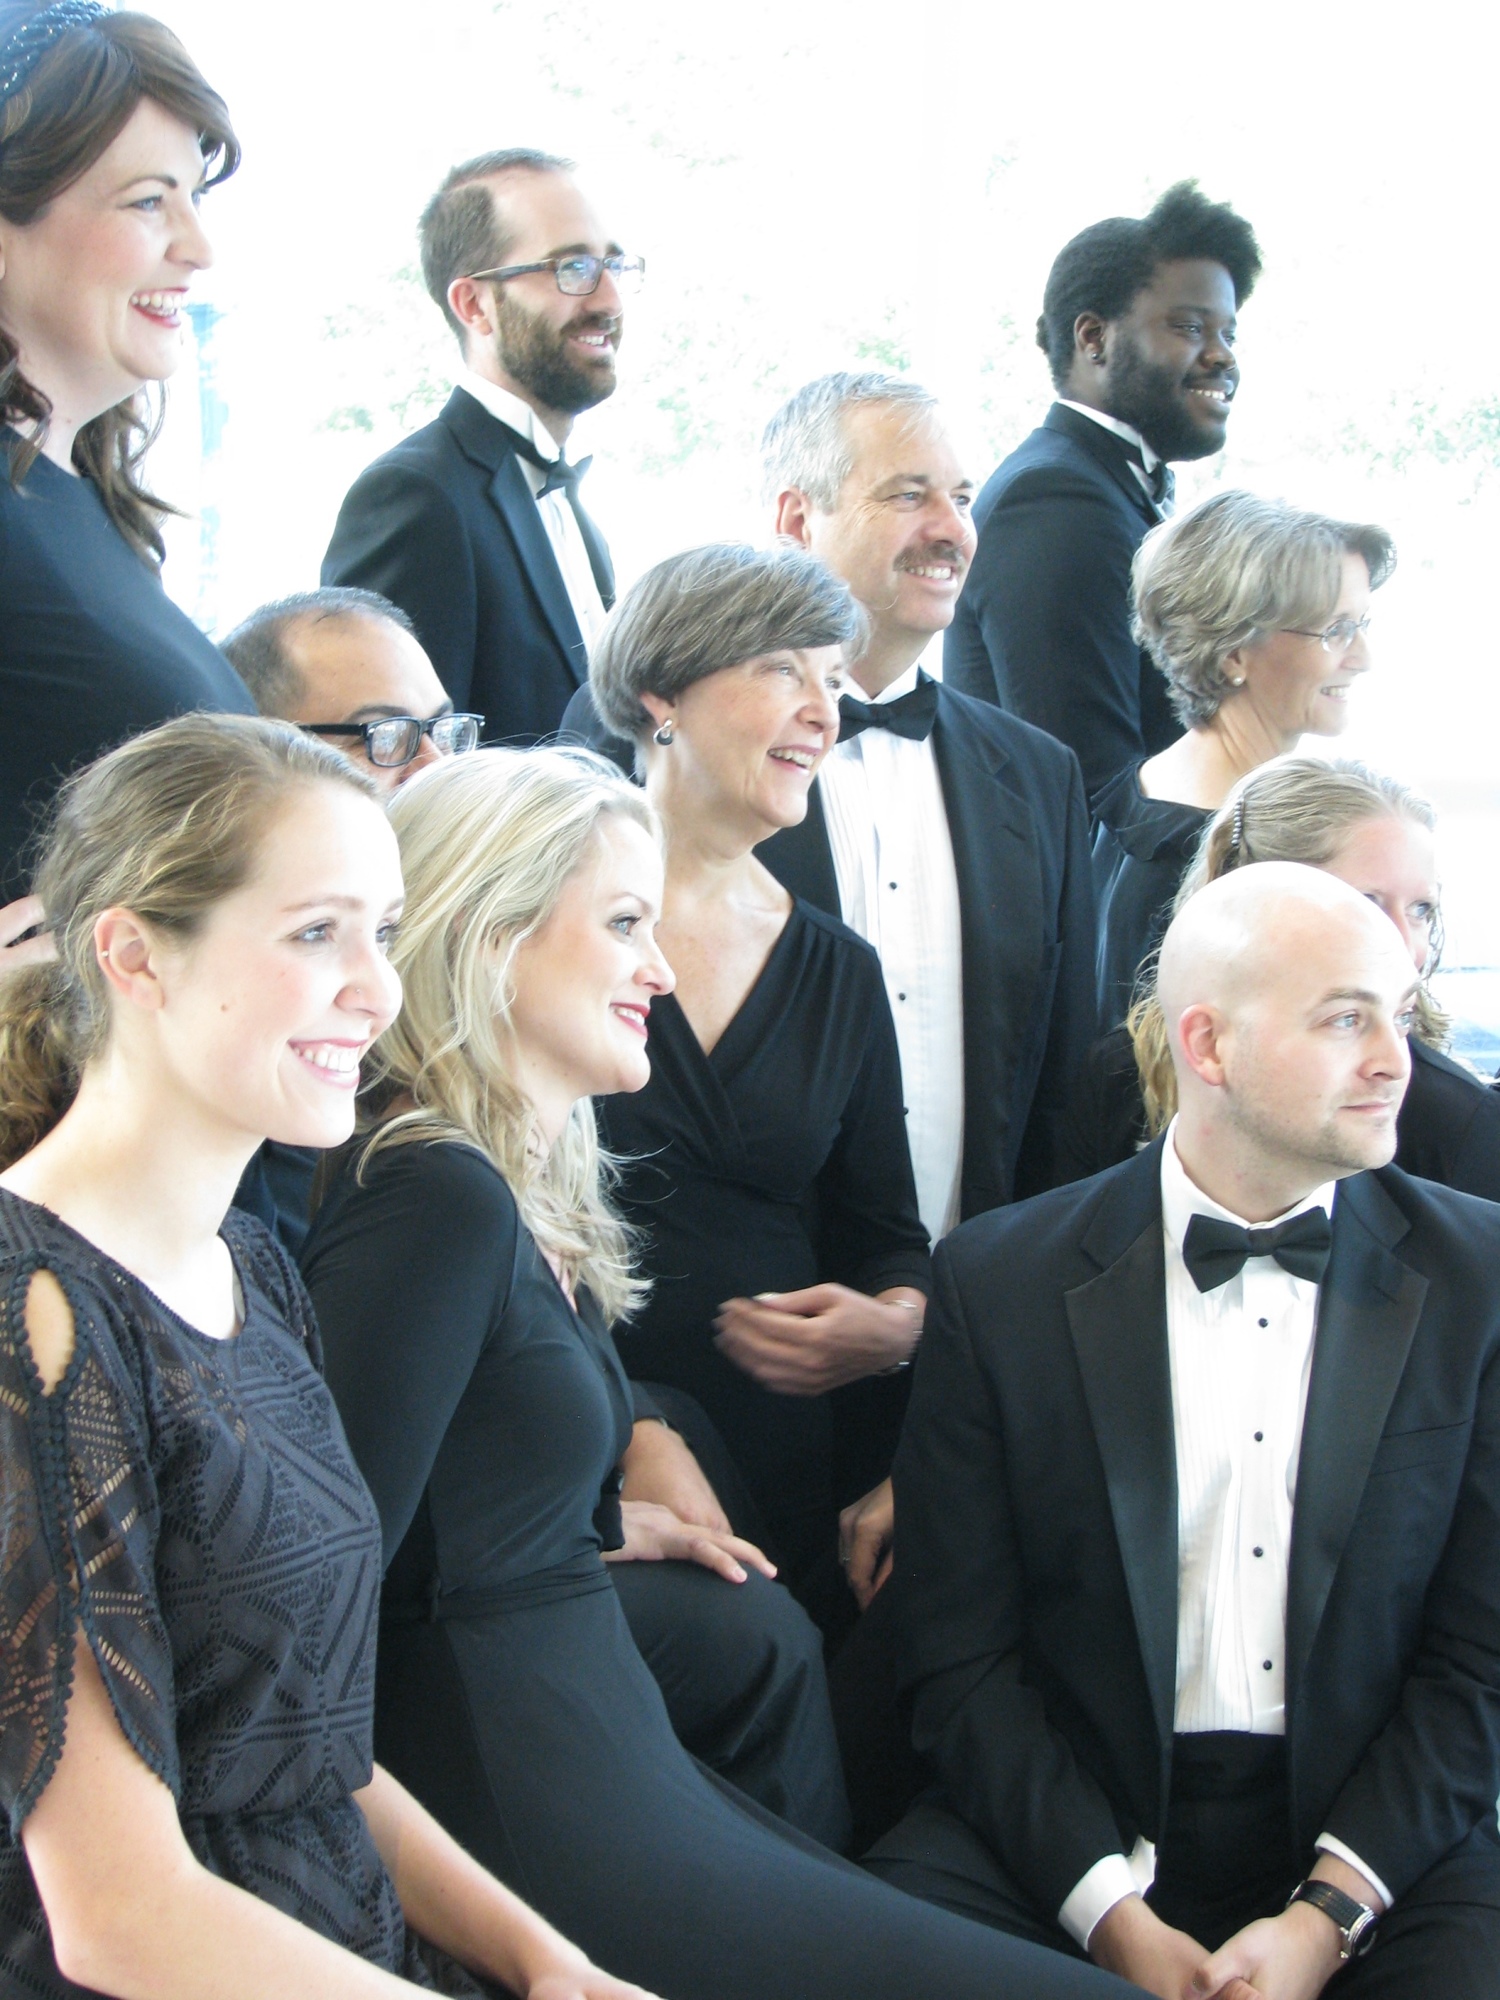 Choral Artists of Sarasota last performed beside live dancers in 2014 for a show choreographed by Elizabeth Weil Bergmann in commemoration of the Holocaust.